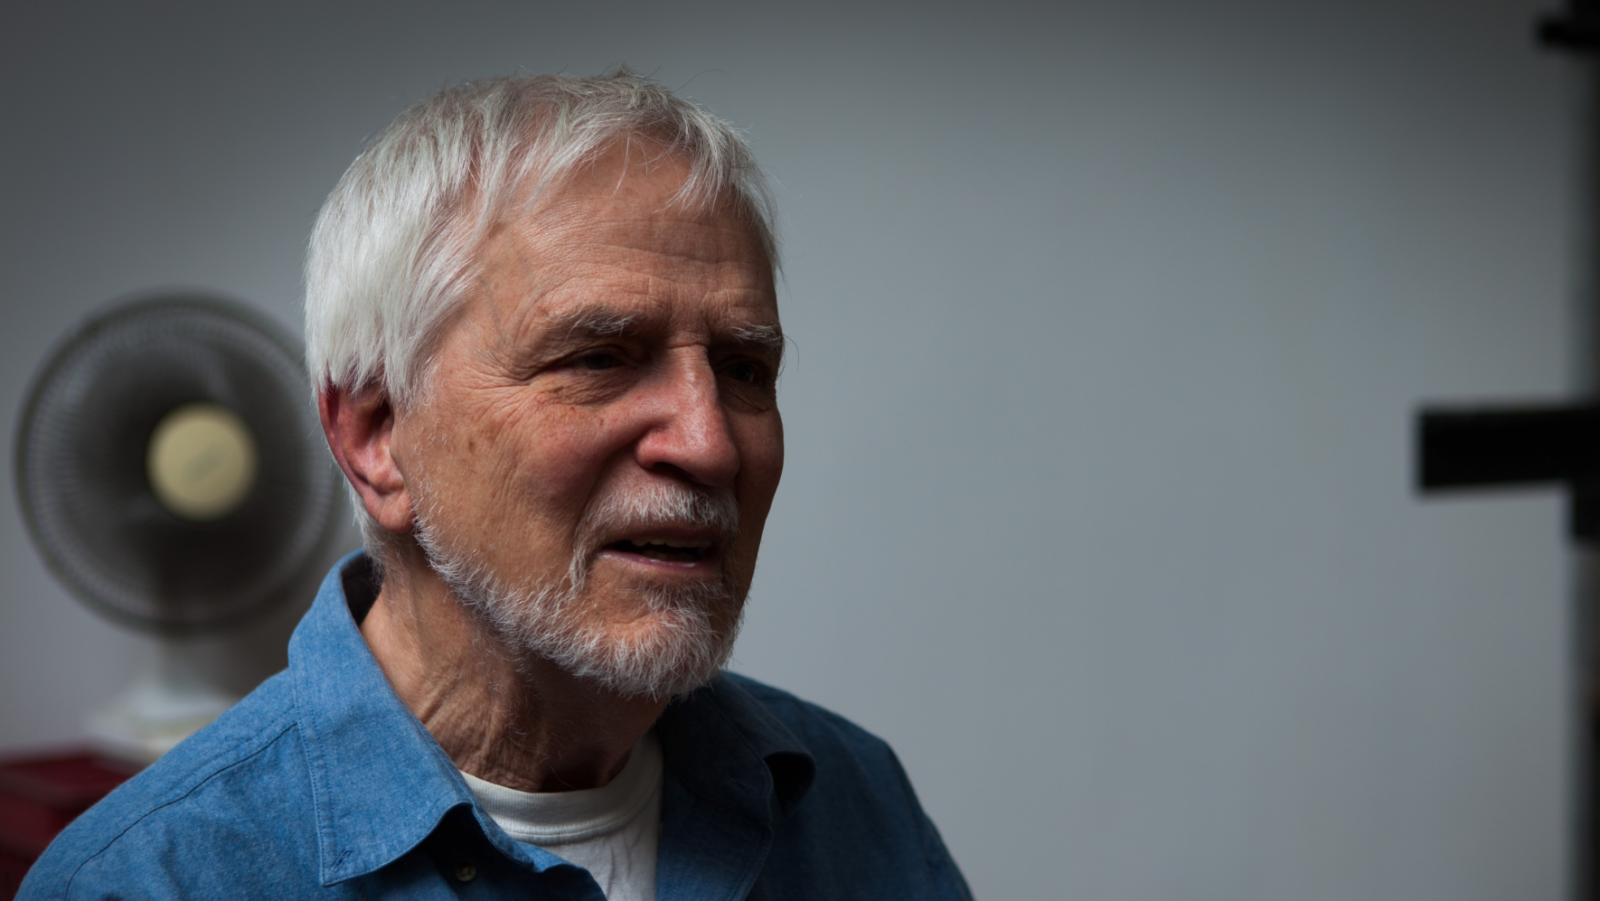 Close up photo portrait of Lennart Anderson in his studio, with gray beard, gray hair, blue button up shirt with white t shirt in the middle of speaking.